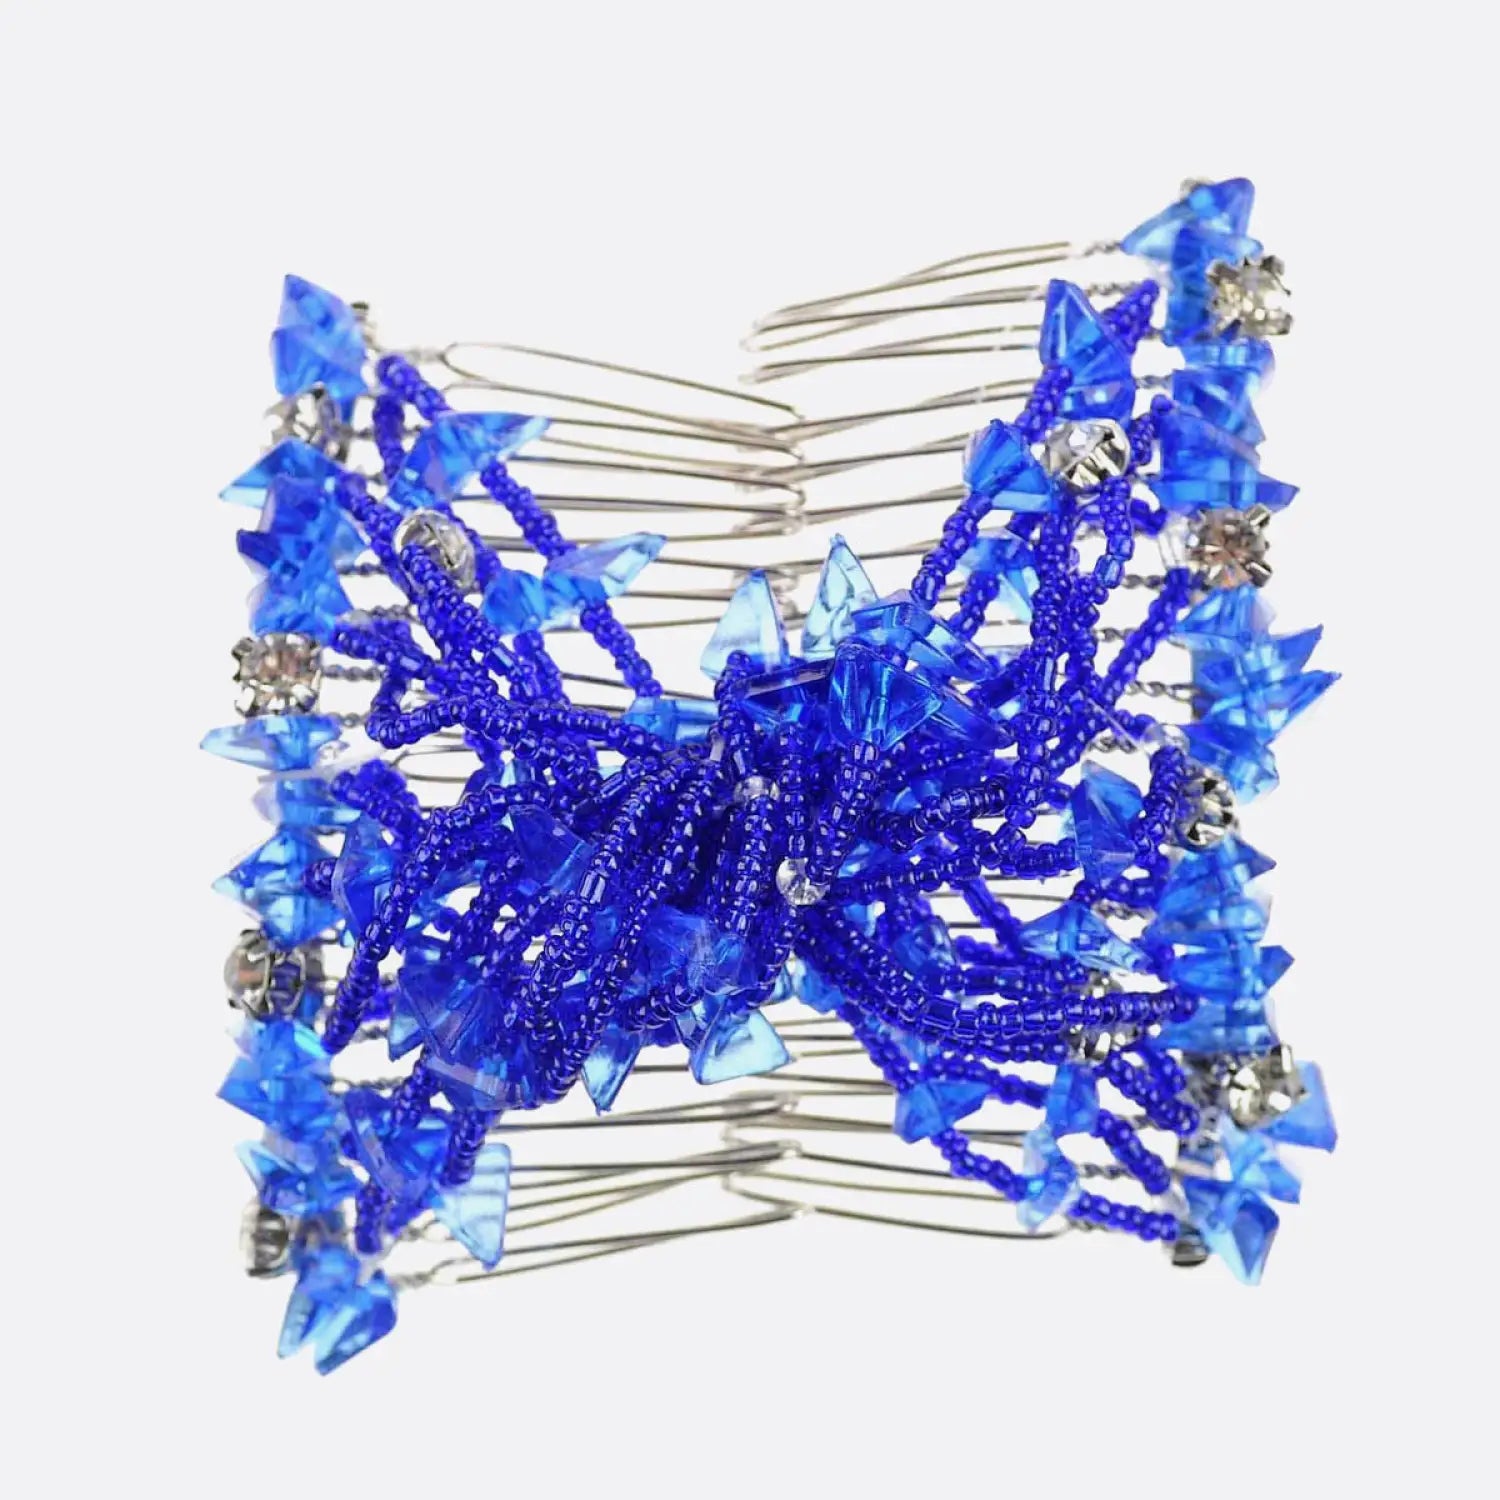 Blue hair comb with butterfly design from Rhinestone Beads Twin Magic Hair Combs.